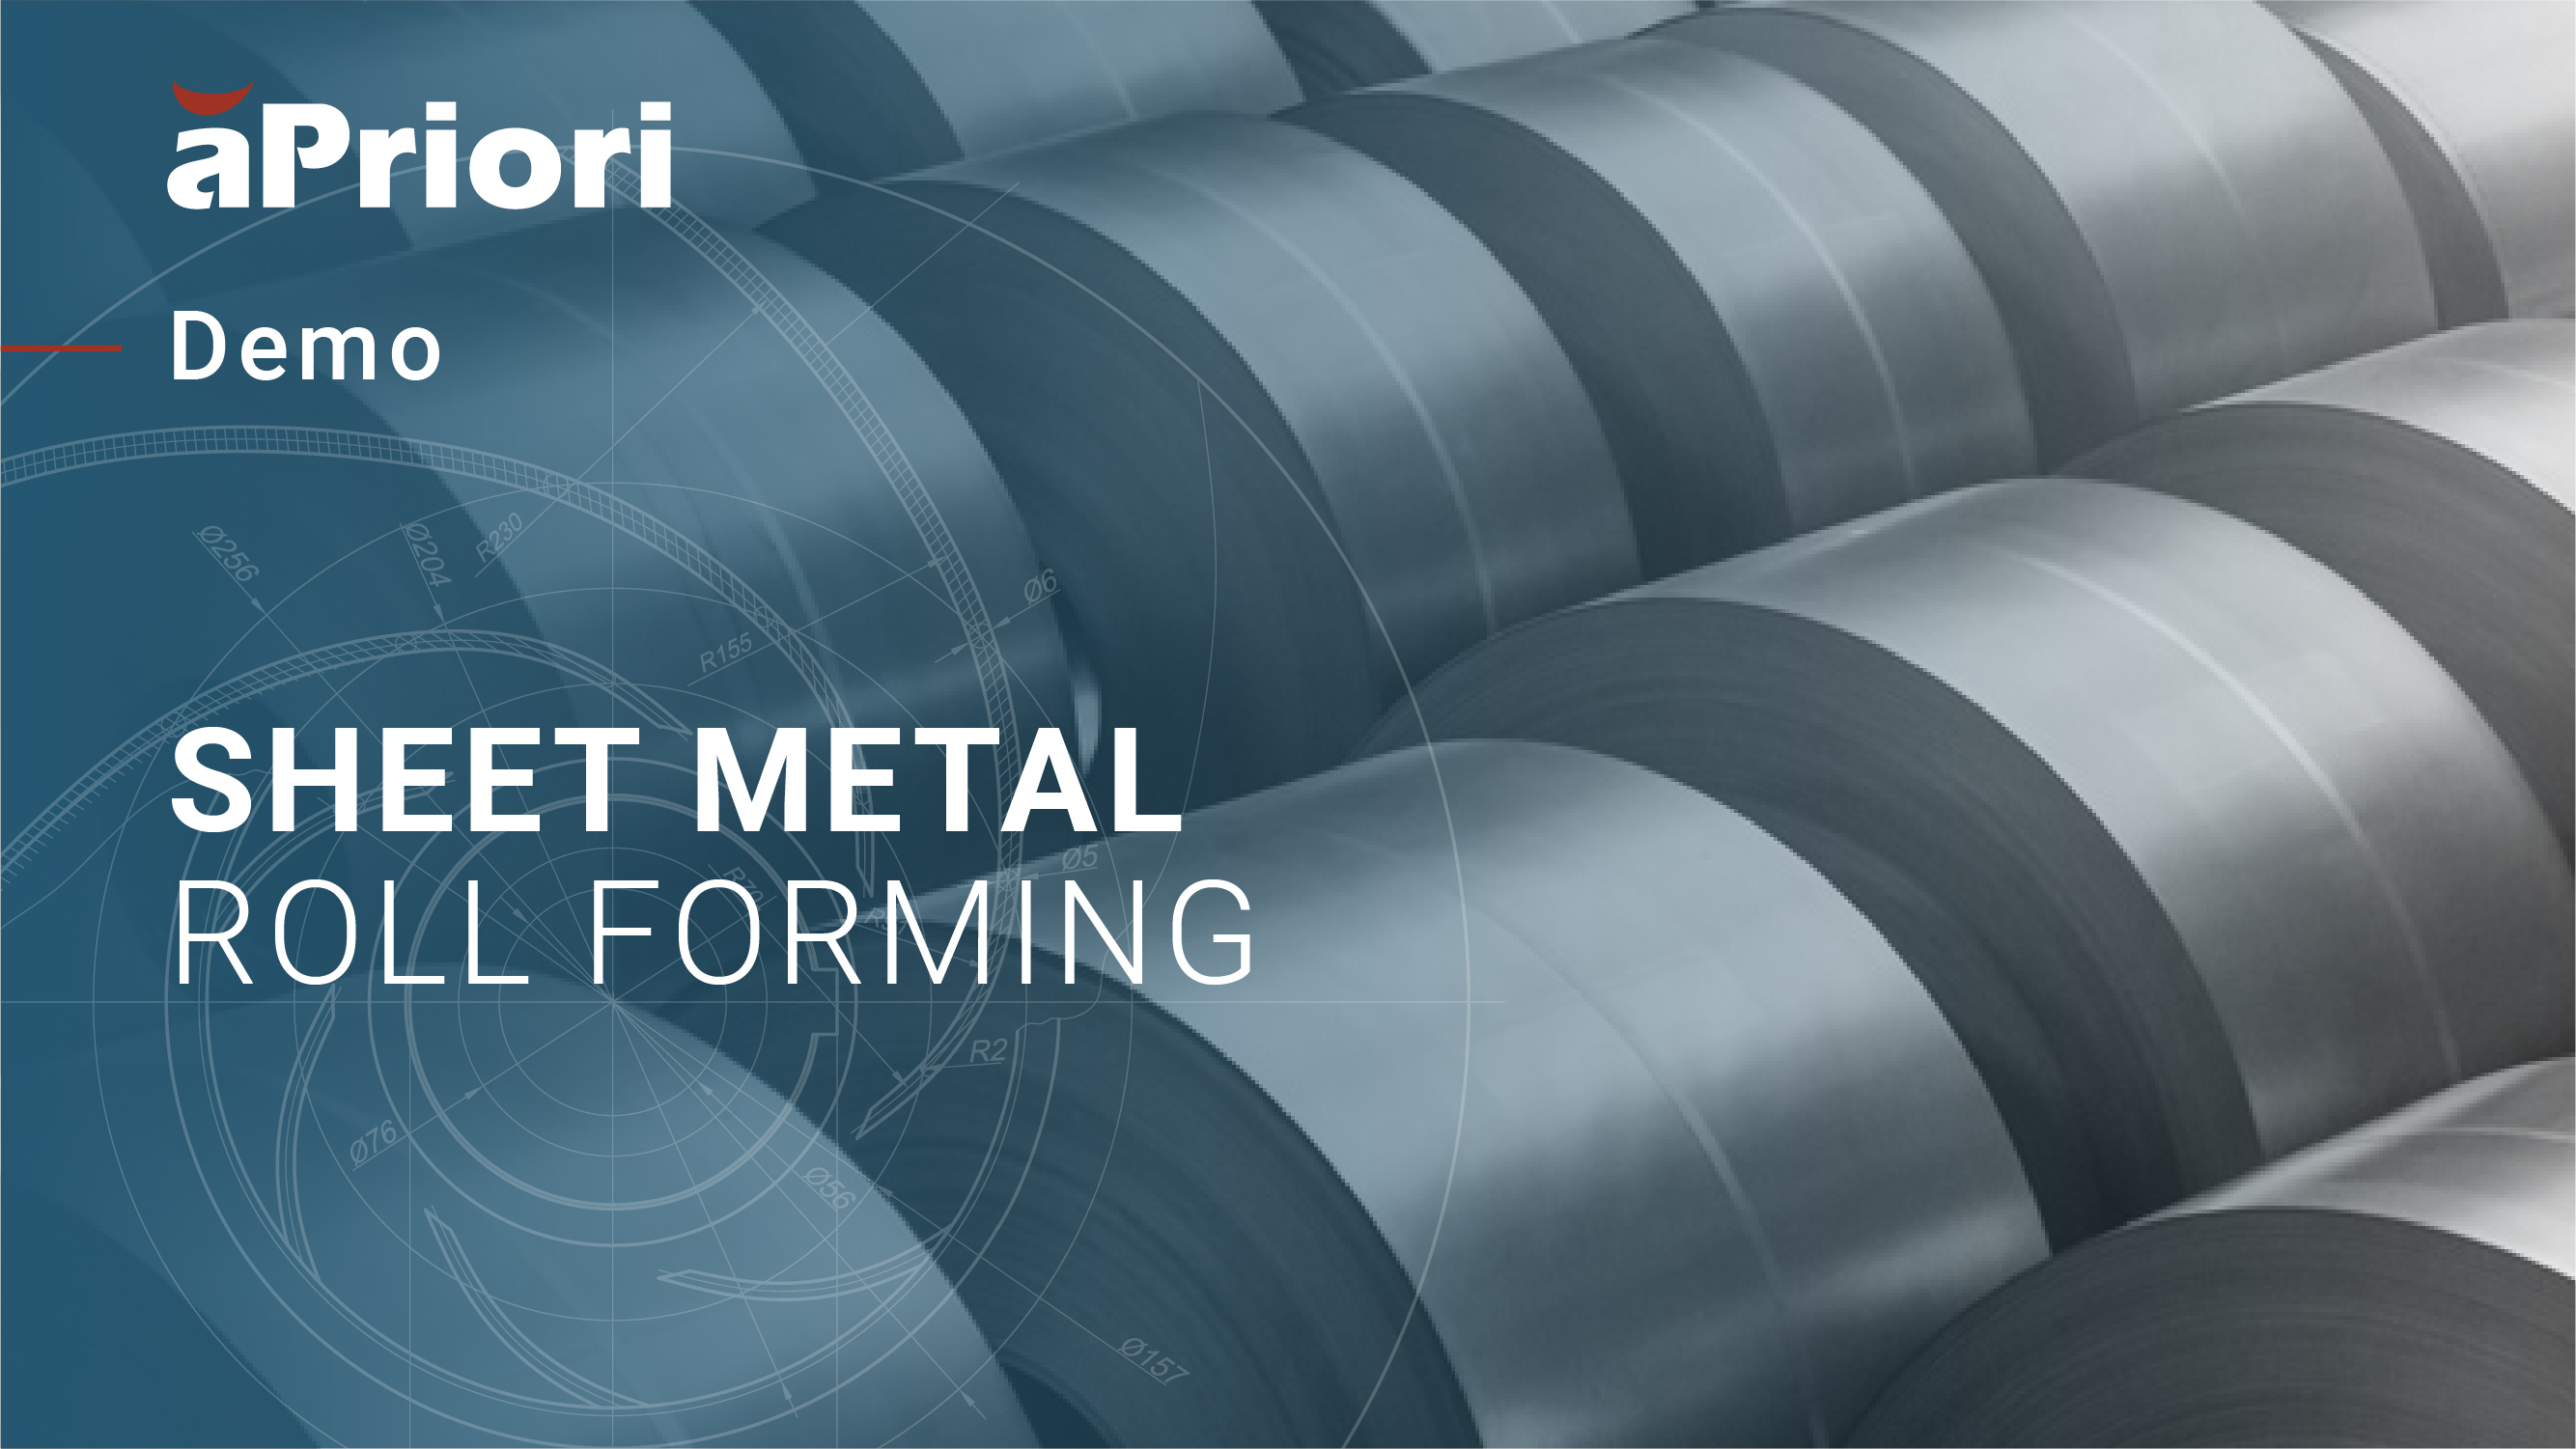 Demonstration of aPriori's Sheet Metal - Roll Forming Cost Model